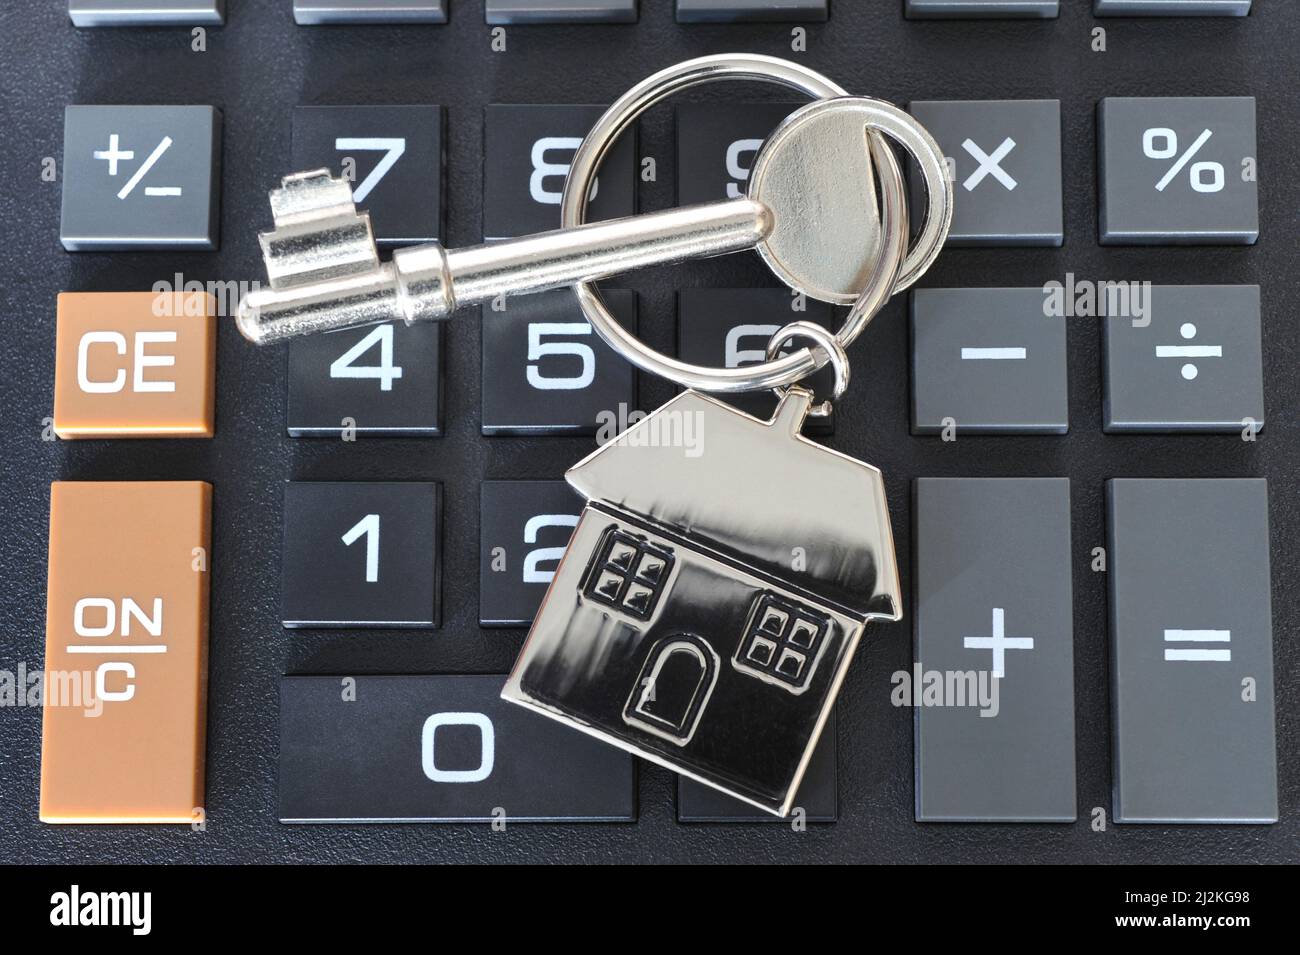 HOUSE KEY RING WITH HOUSE KEY AND CALCULATOR RE COST OF LIVING RISING PRICES GAS ELECTRICITY HEATING ETC UK Stock Photo